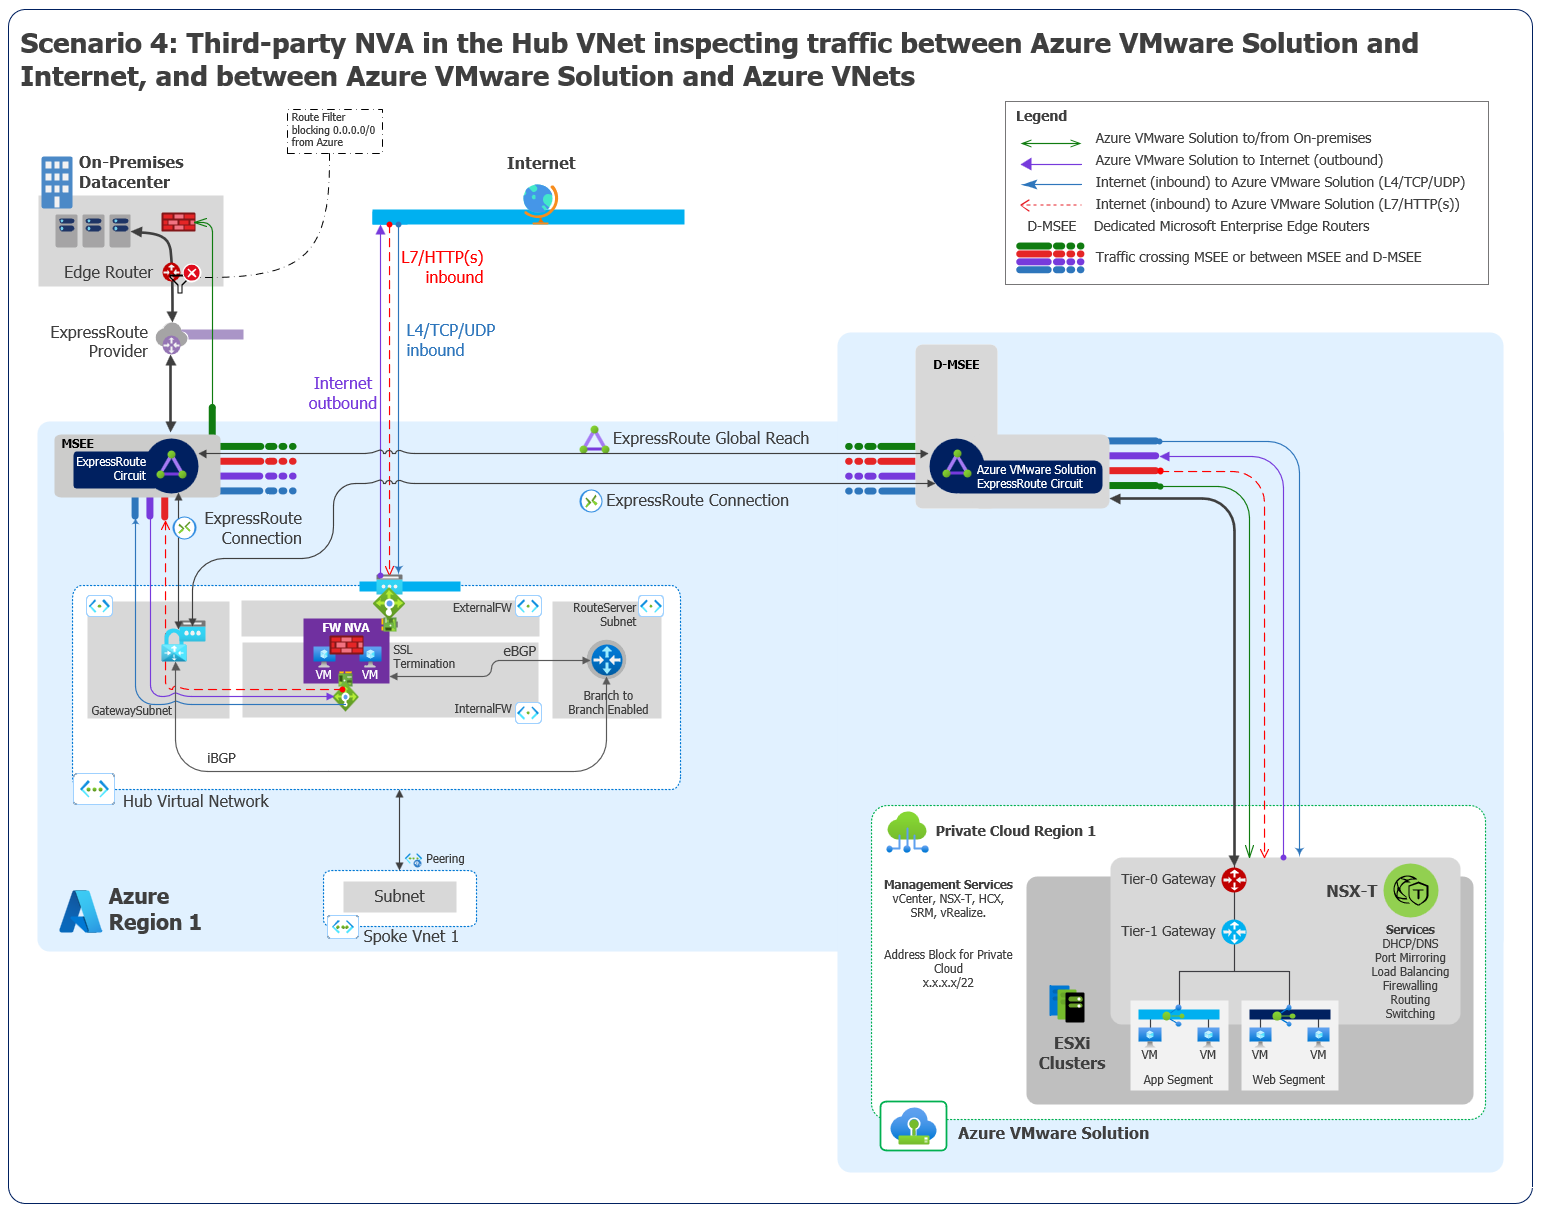 Diagram of scenario 4 with a third-party N V A in the hub V Net inspecting traffic between Azure VMware Solution and the internet and between Azure VMware Solution and Azure Virtual Network.